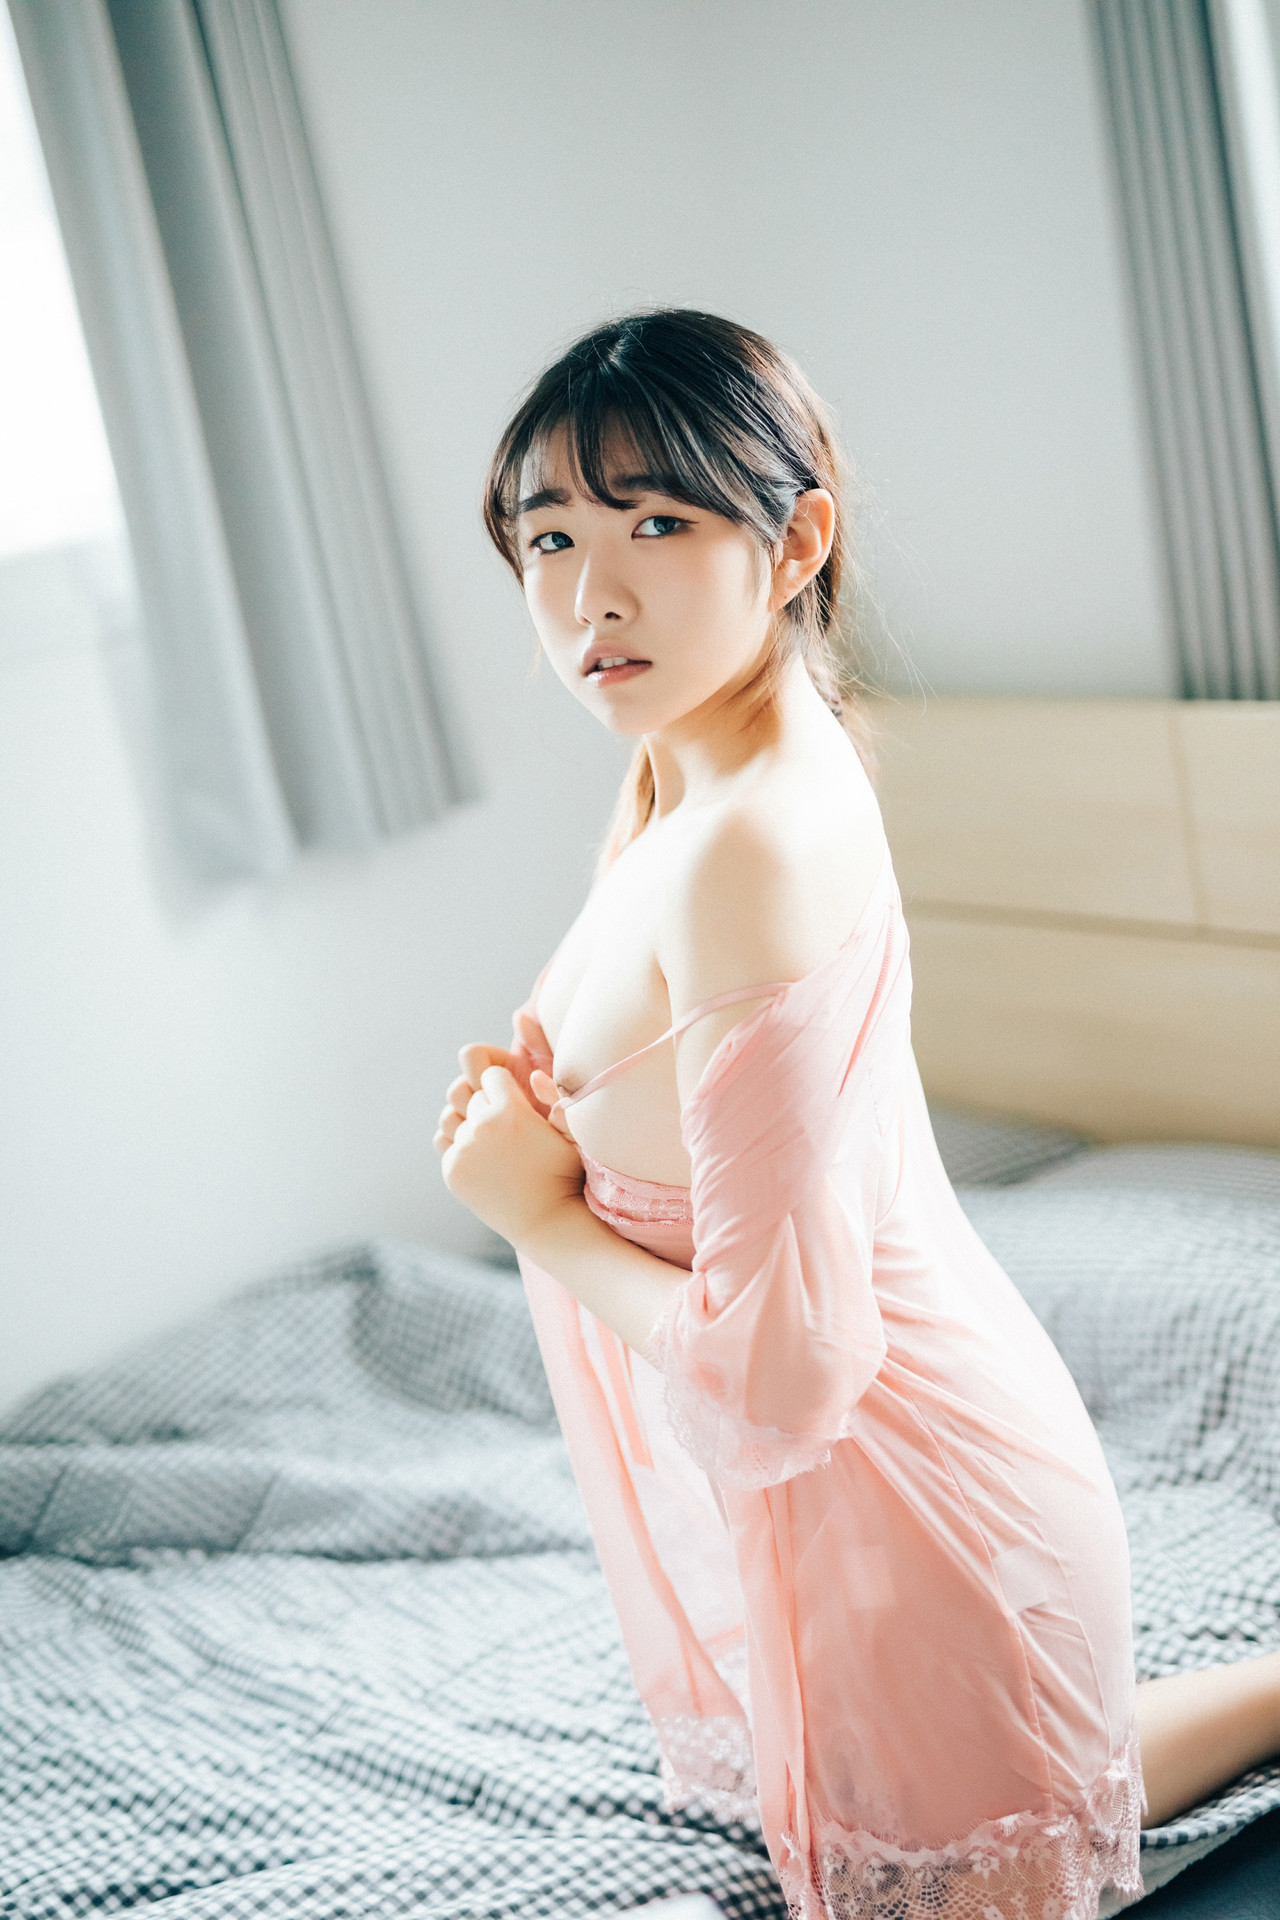 Sonson 손손, [Loozy] Date at home (+S Ver) Set.02(7)